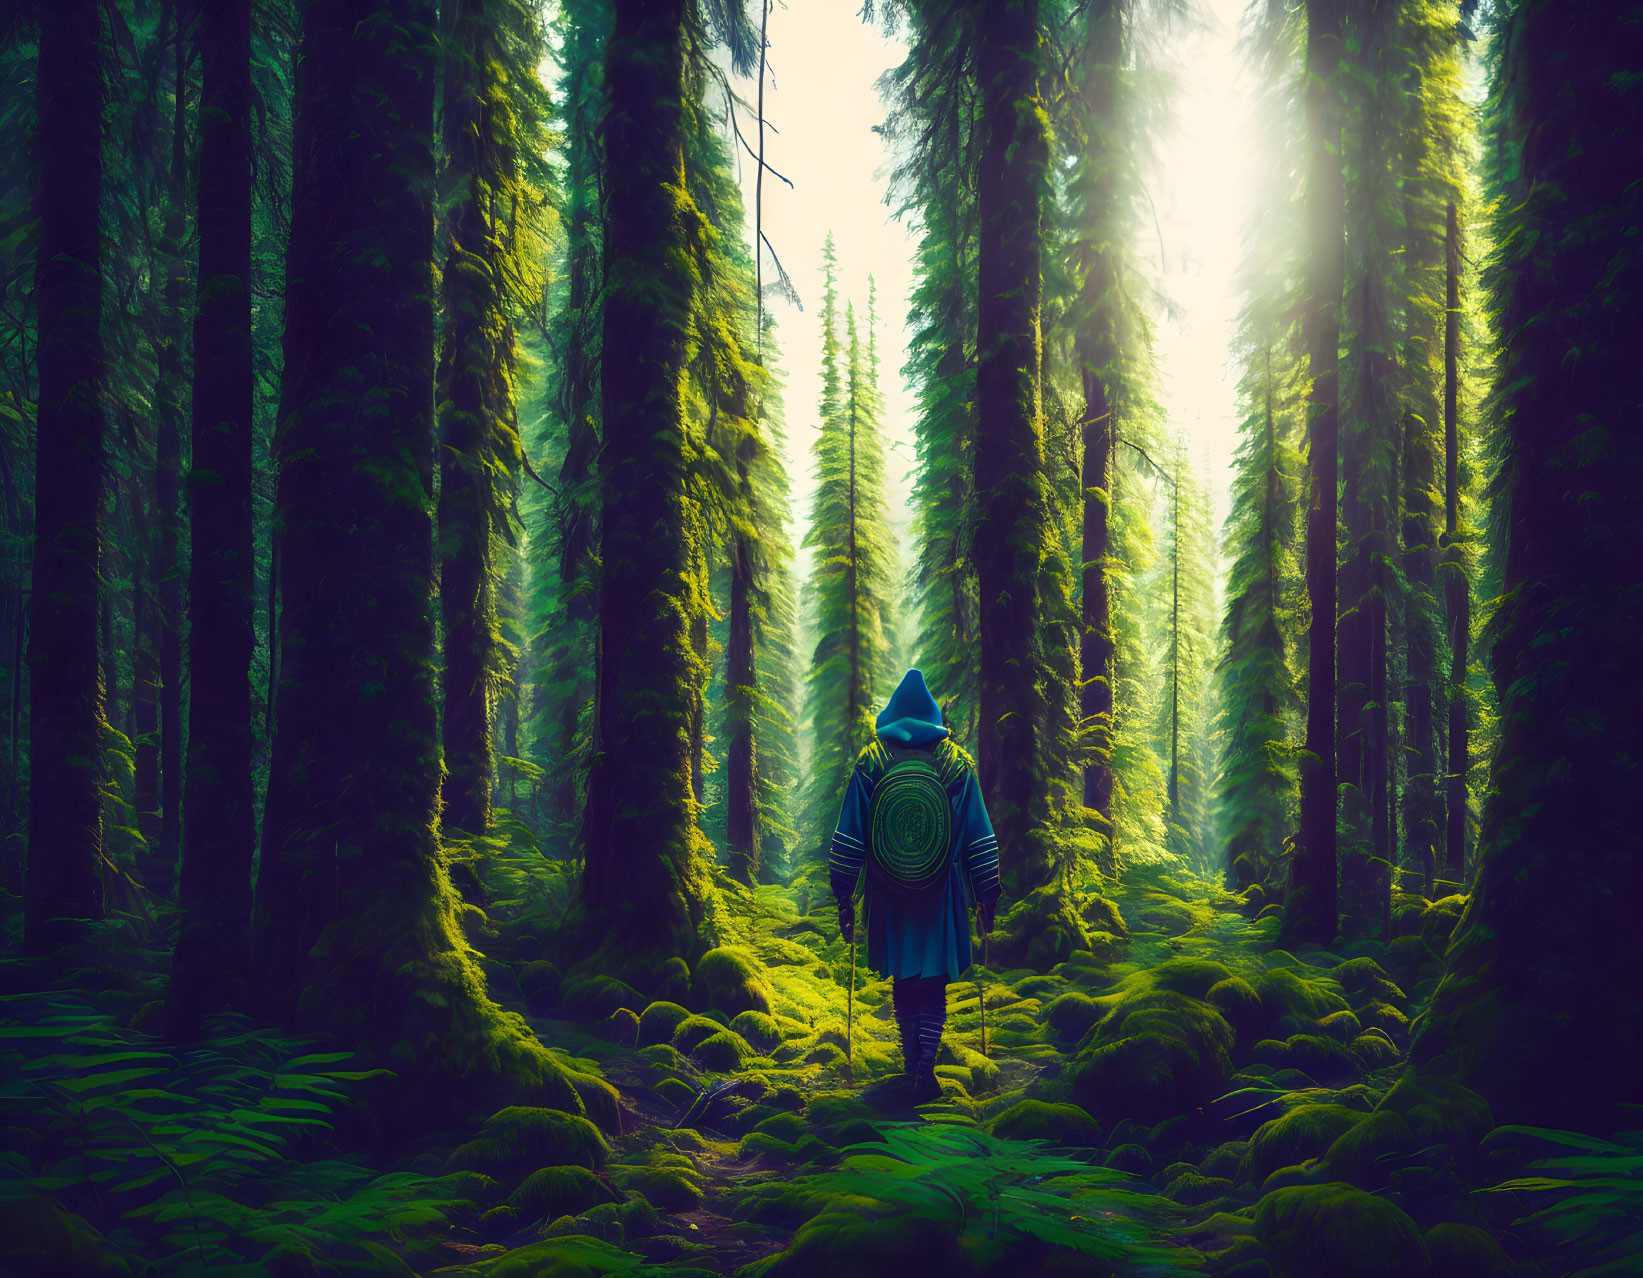 Person with backpack walking in sunlit mossy forest